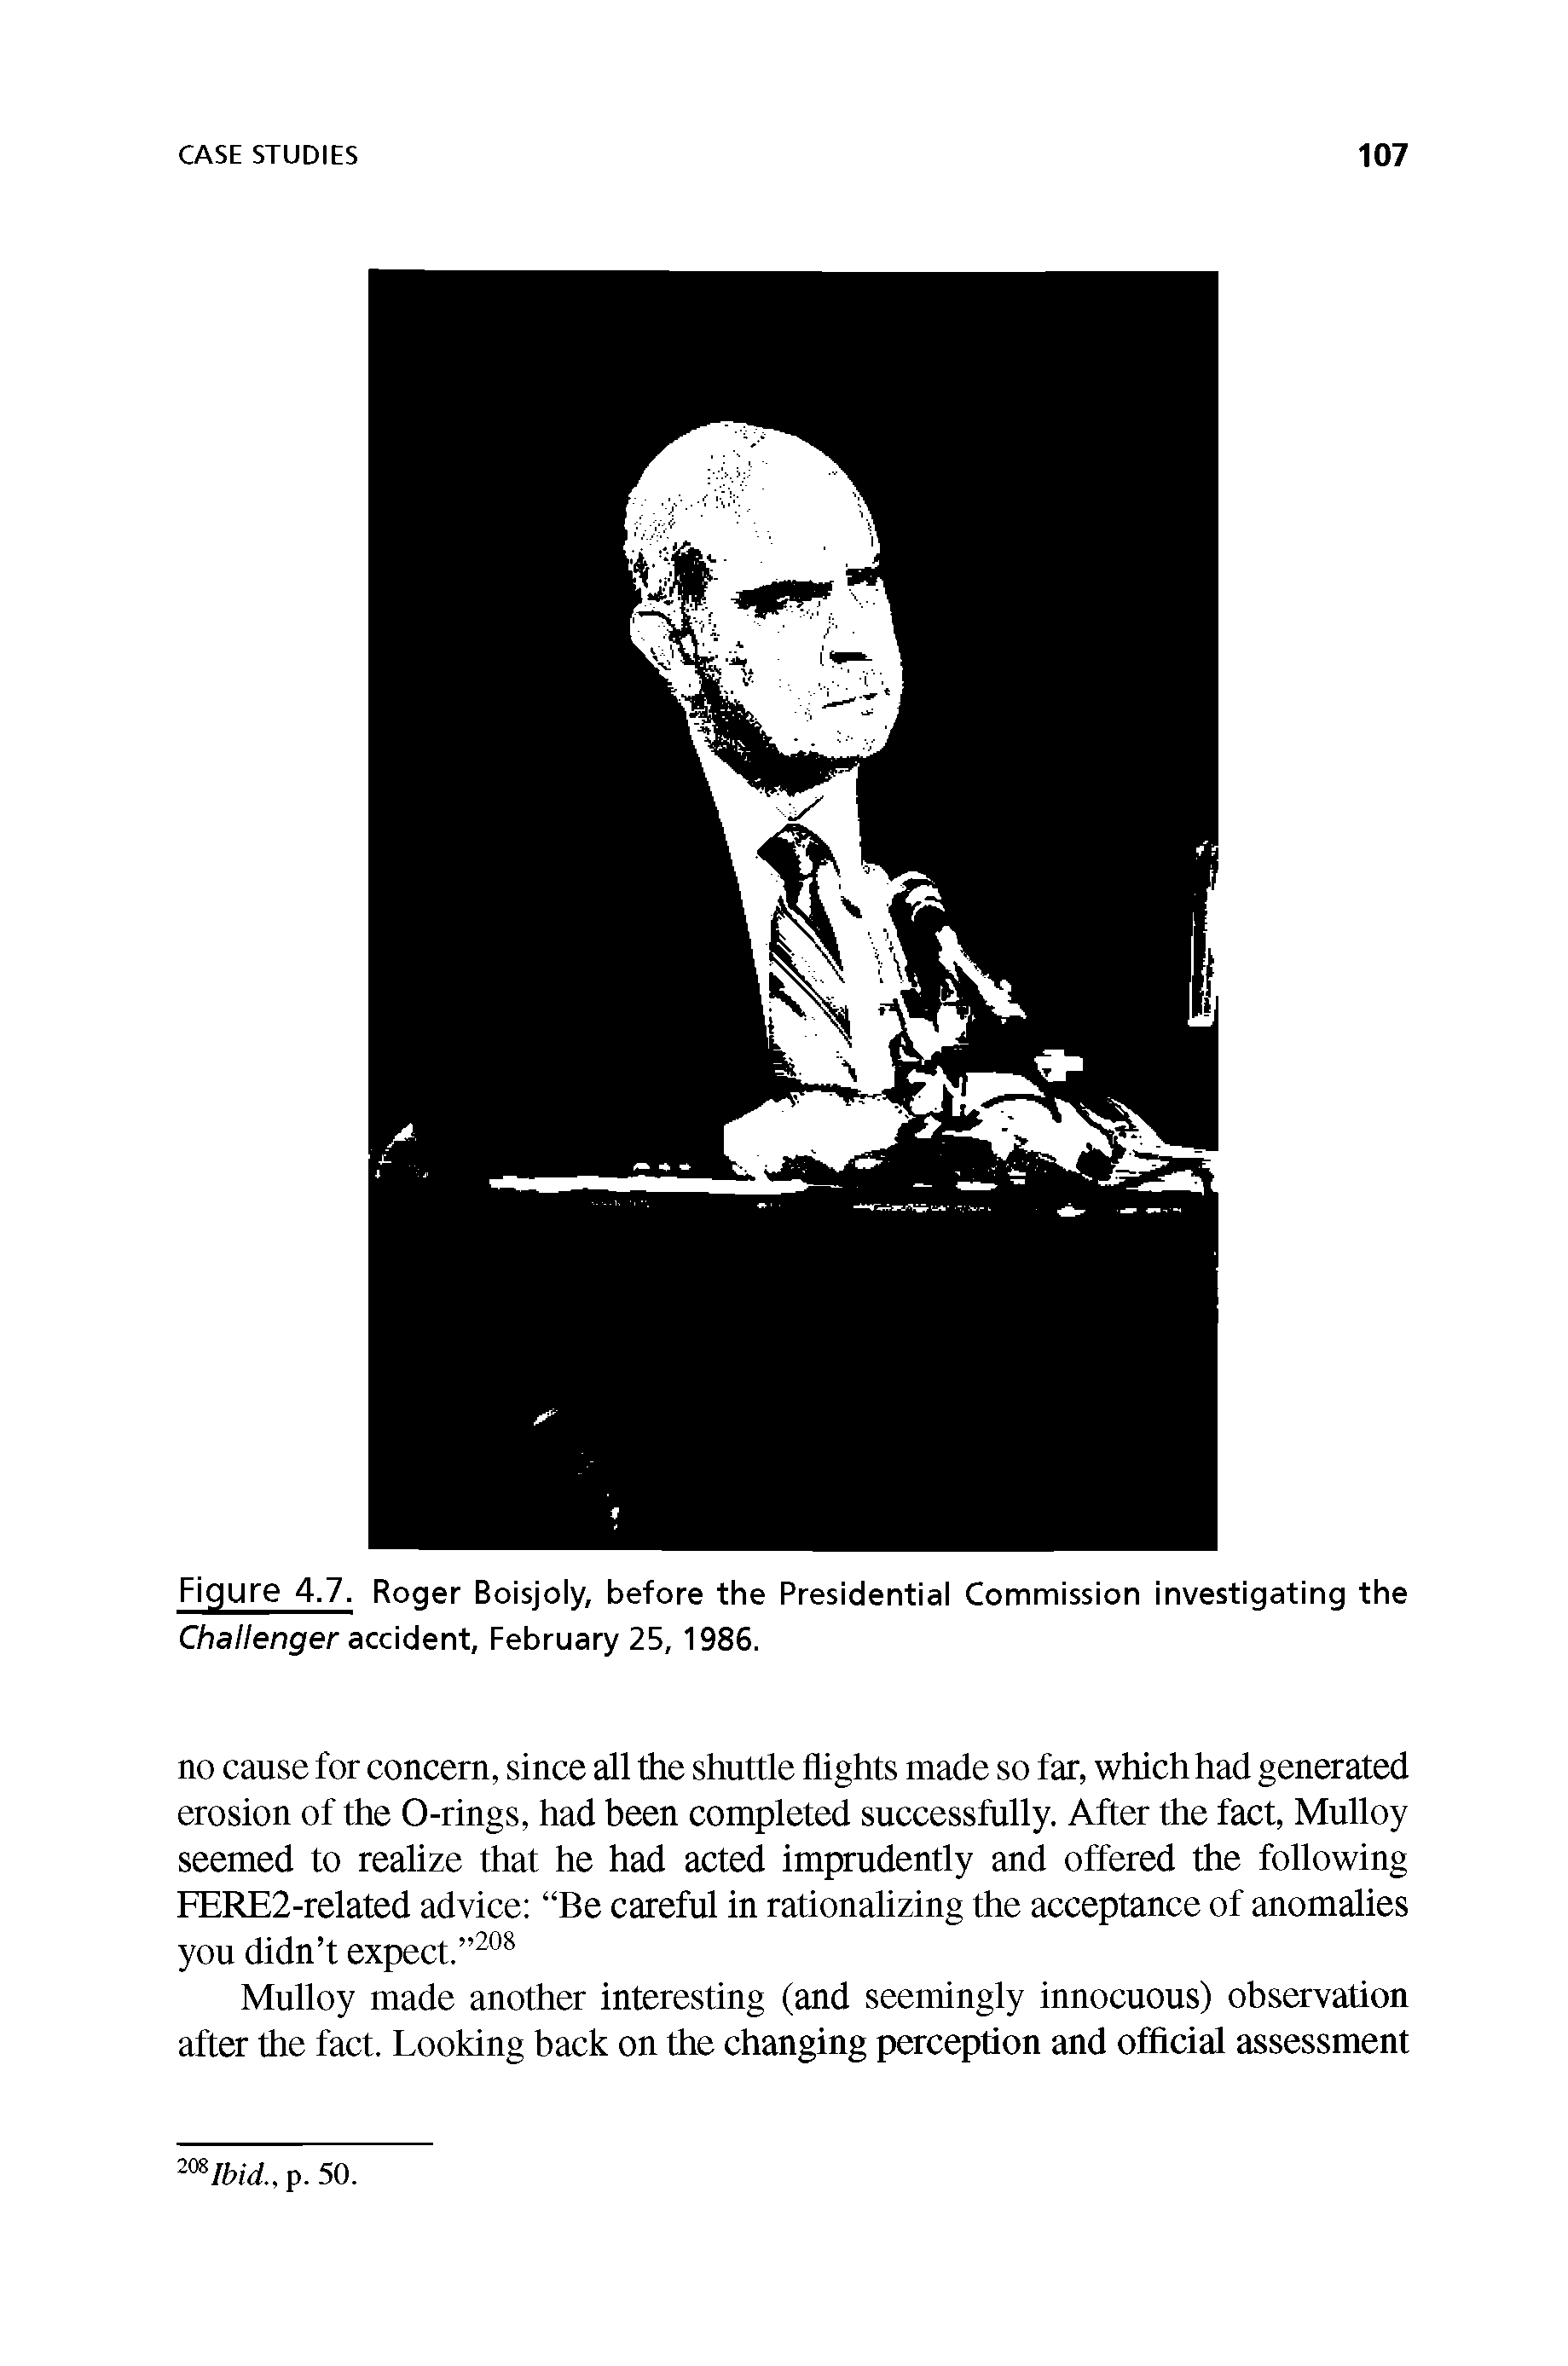 Figure 4.7. Roger Boisjoly, before the Presidential Commission investigating the Challenger accident, February 25,1986.